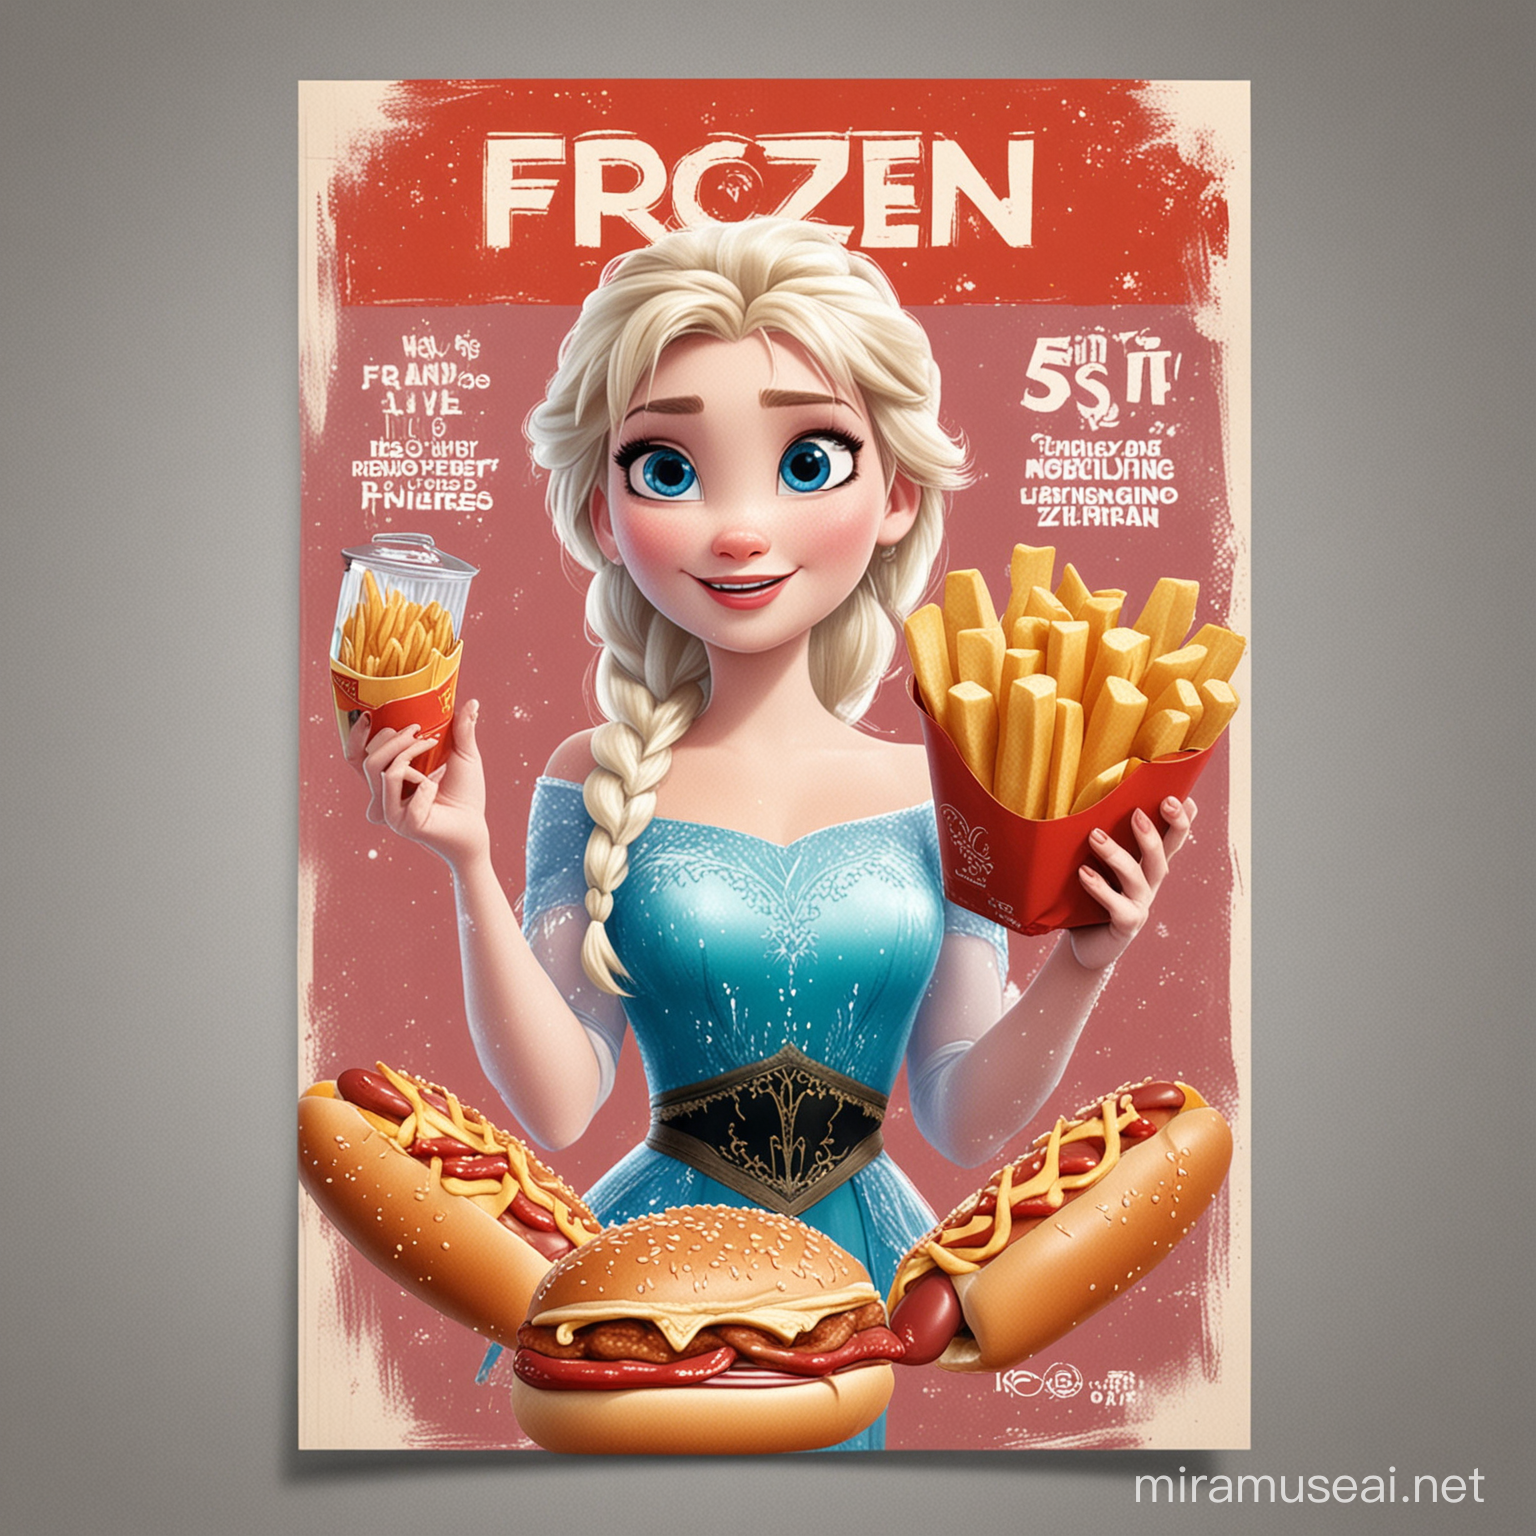 Alter the poster of frozen into funny style. Make elsa handling pack of hotdog, pack of spam, pack of fries, pack of chicken, pack of frozen seafoods
